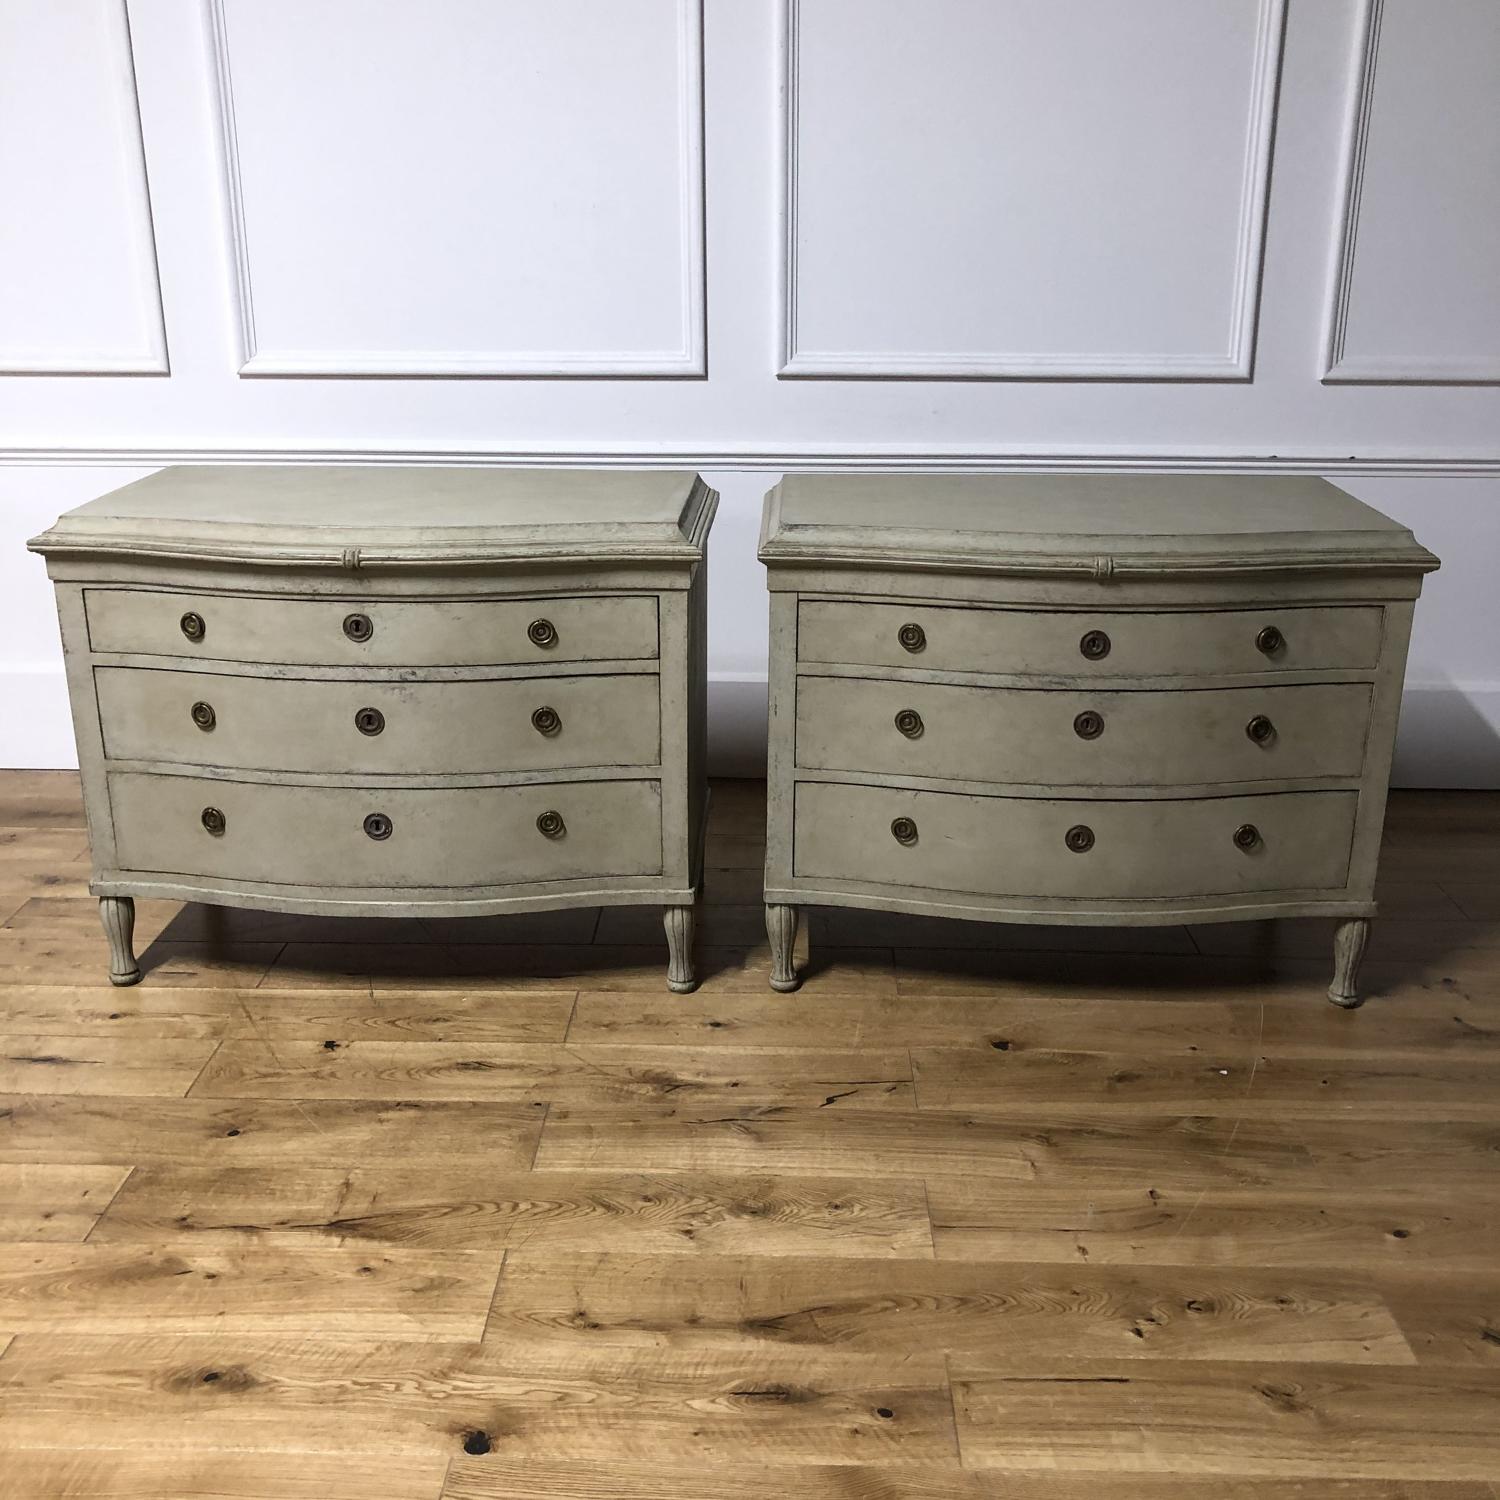 A pair of serpentine commodes